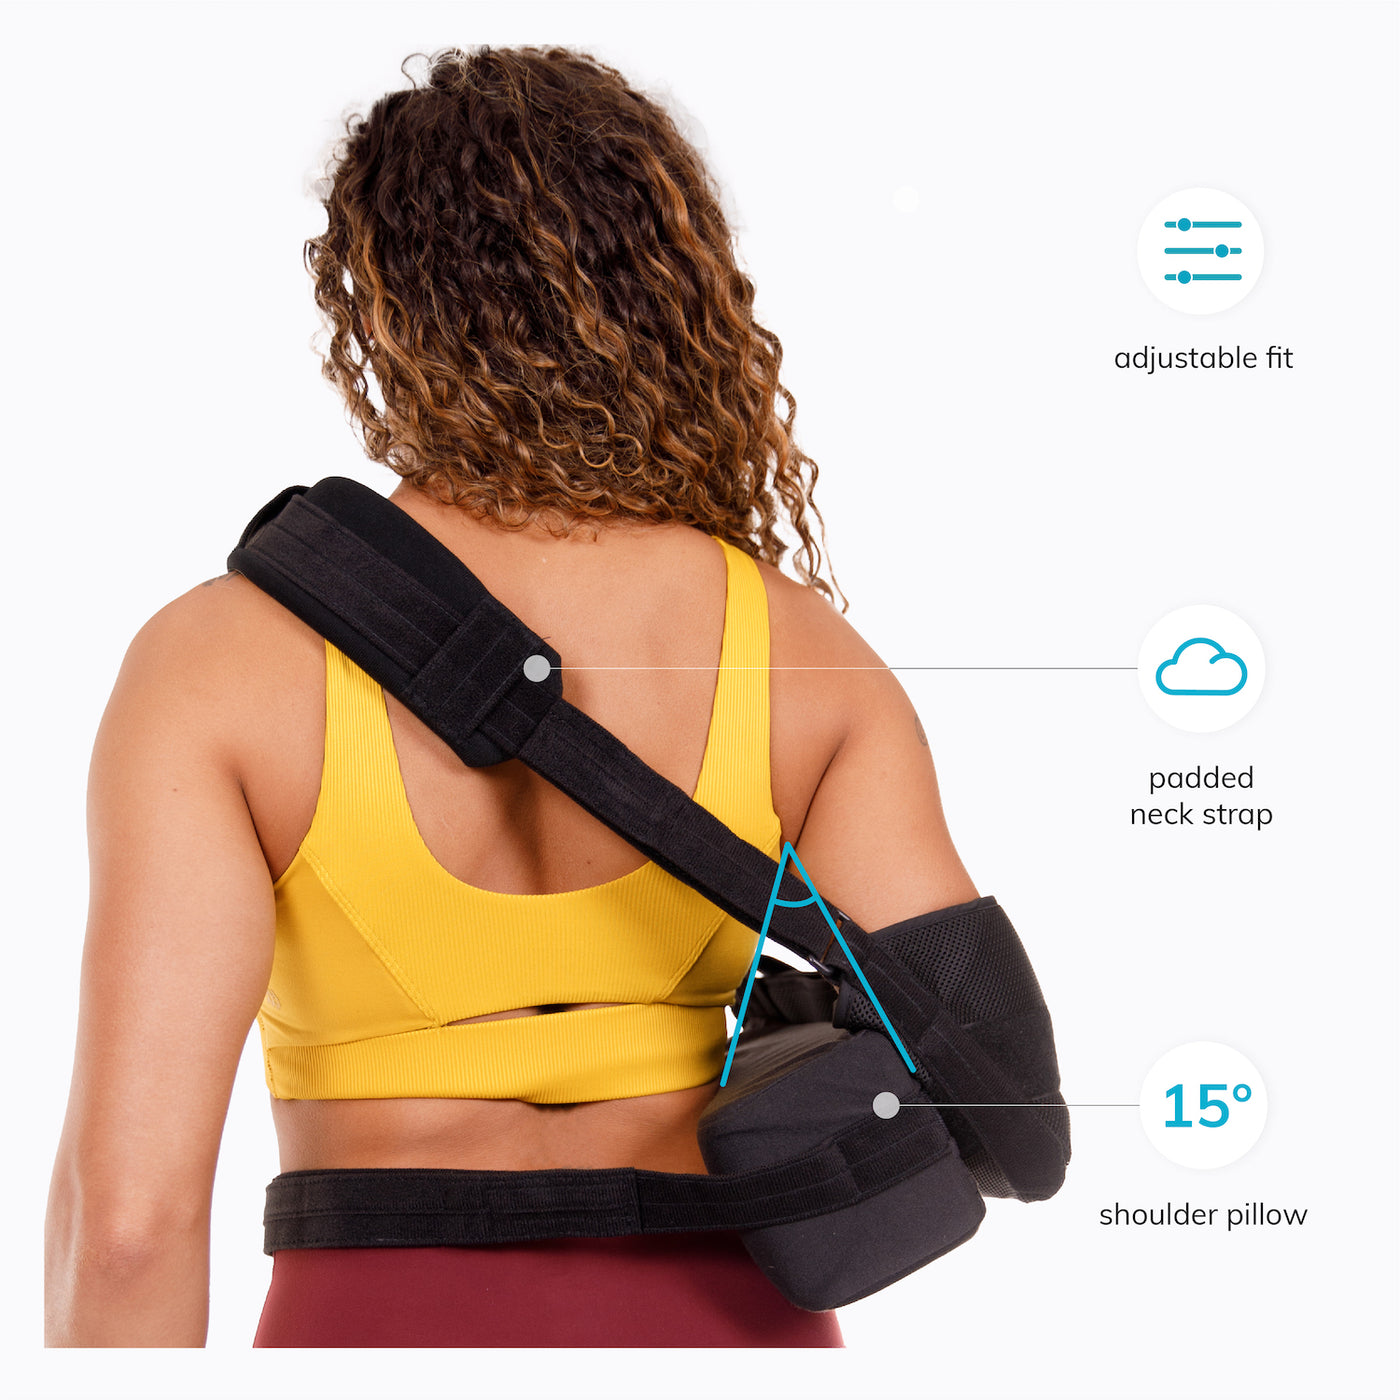 our dislocated shoulder pain relief brace holds your shoulder at 15 degree subluxation for faster recovery